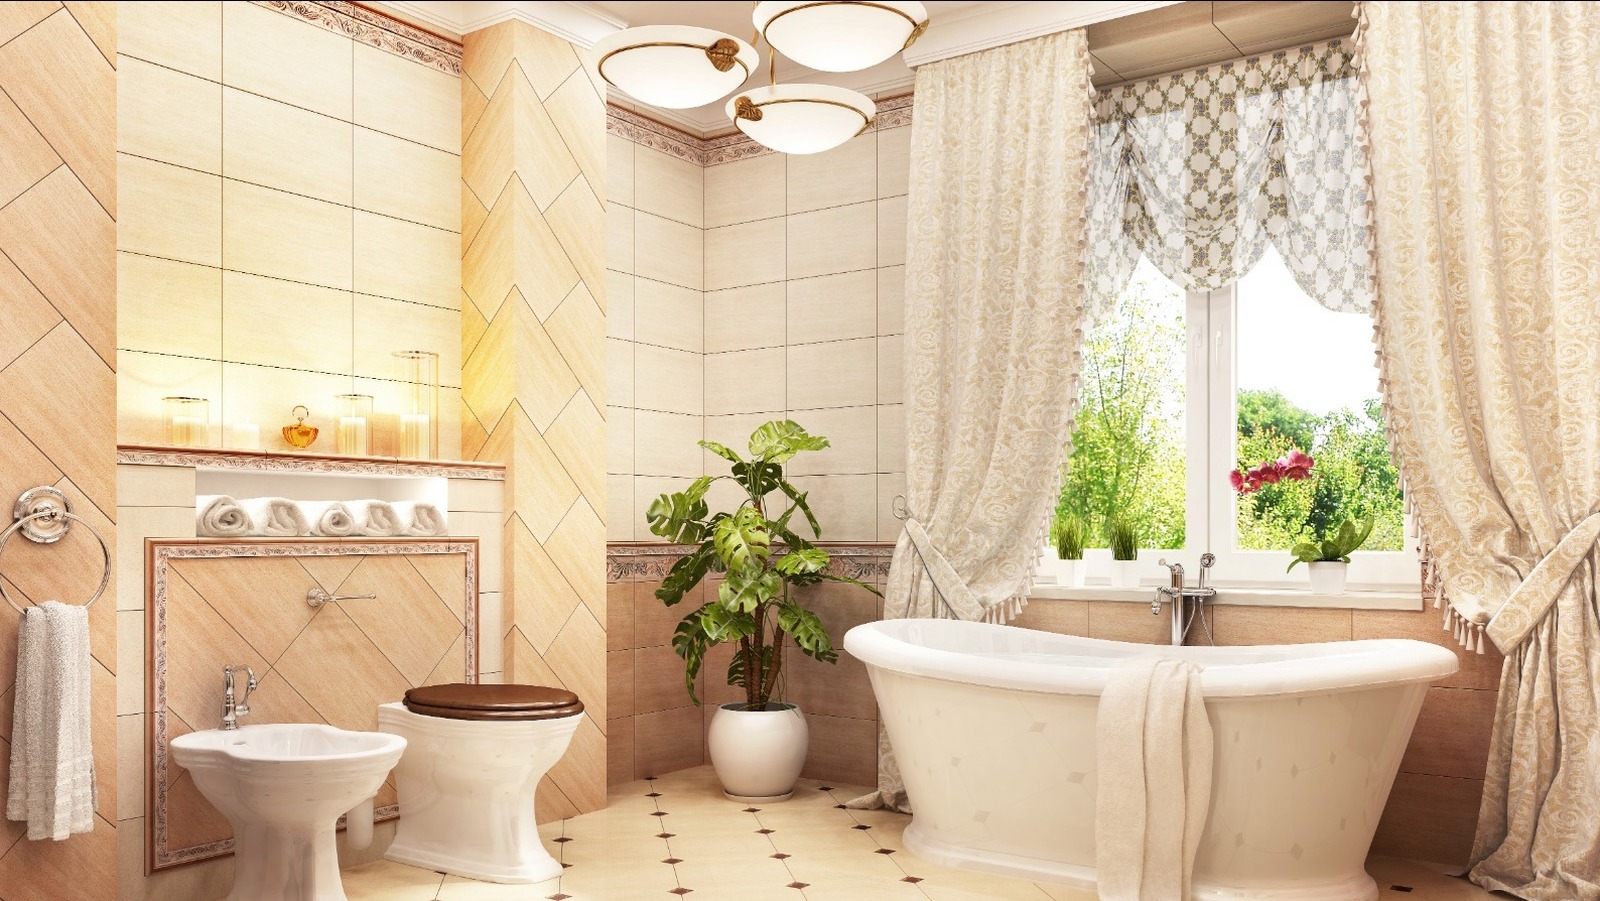 https://www.housedigest.com/img/gallery/ideas-to-create-the-perfect-vintage-bathroom/l-intro-1659577404.jpg